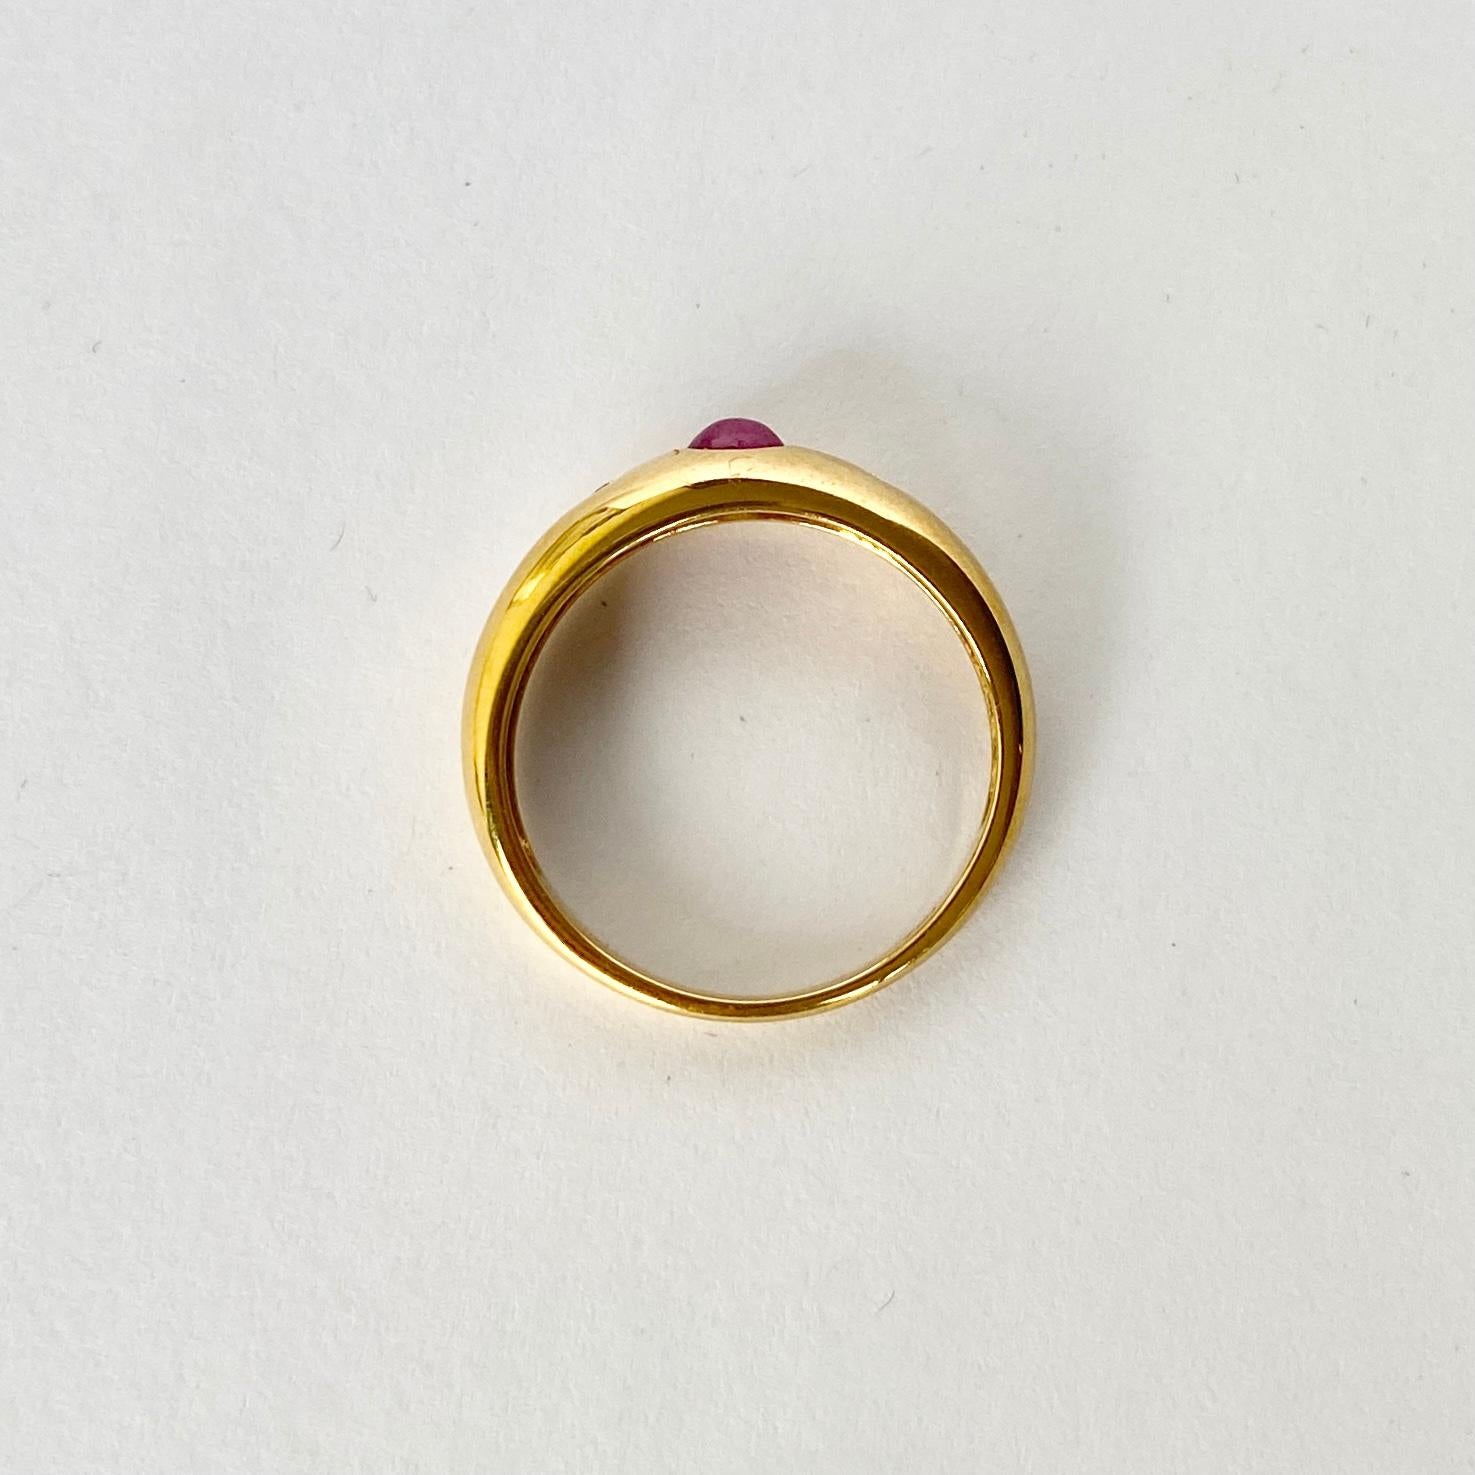 This gorgeous 18carat gold band holds a ruby cabochon stone with sparkling diamonds either side. Diamond total 8pts.

Ring Size: L 1/2 or 6 
Band Width: 5.5mm

Weight: 2.75g